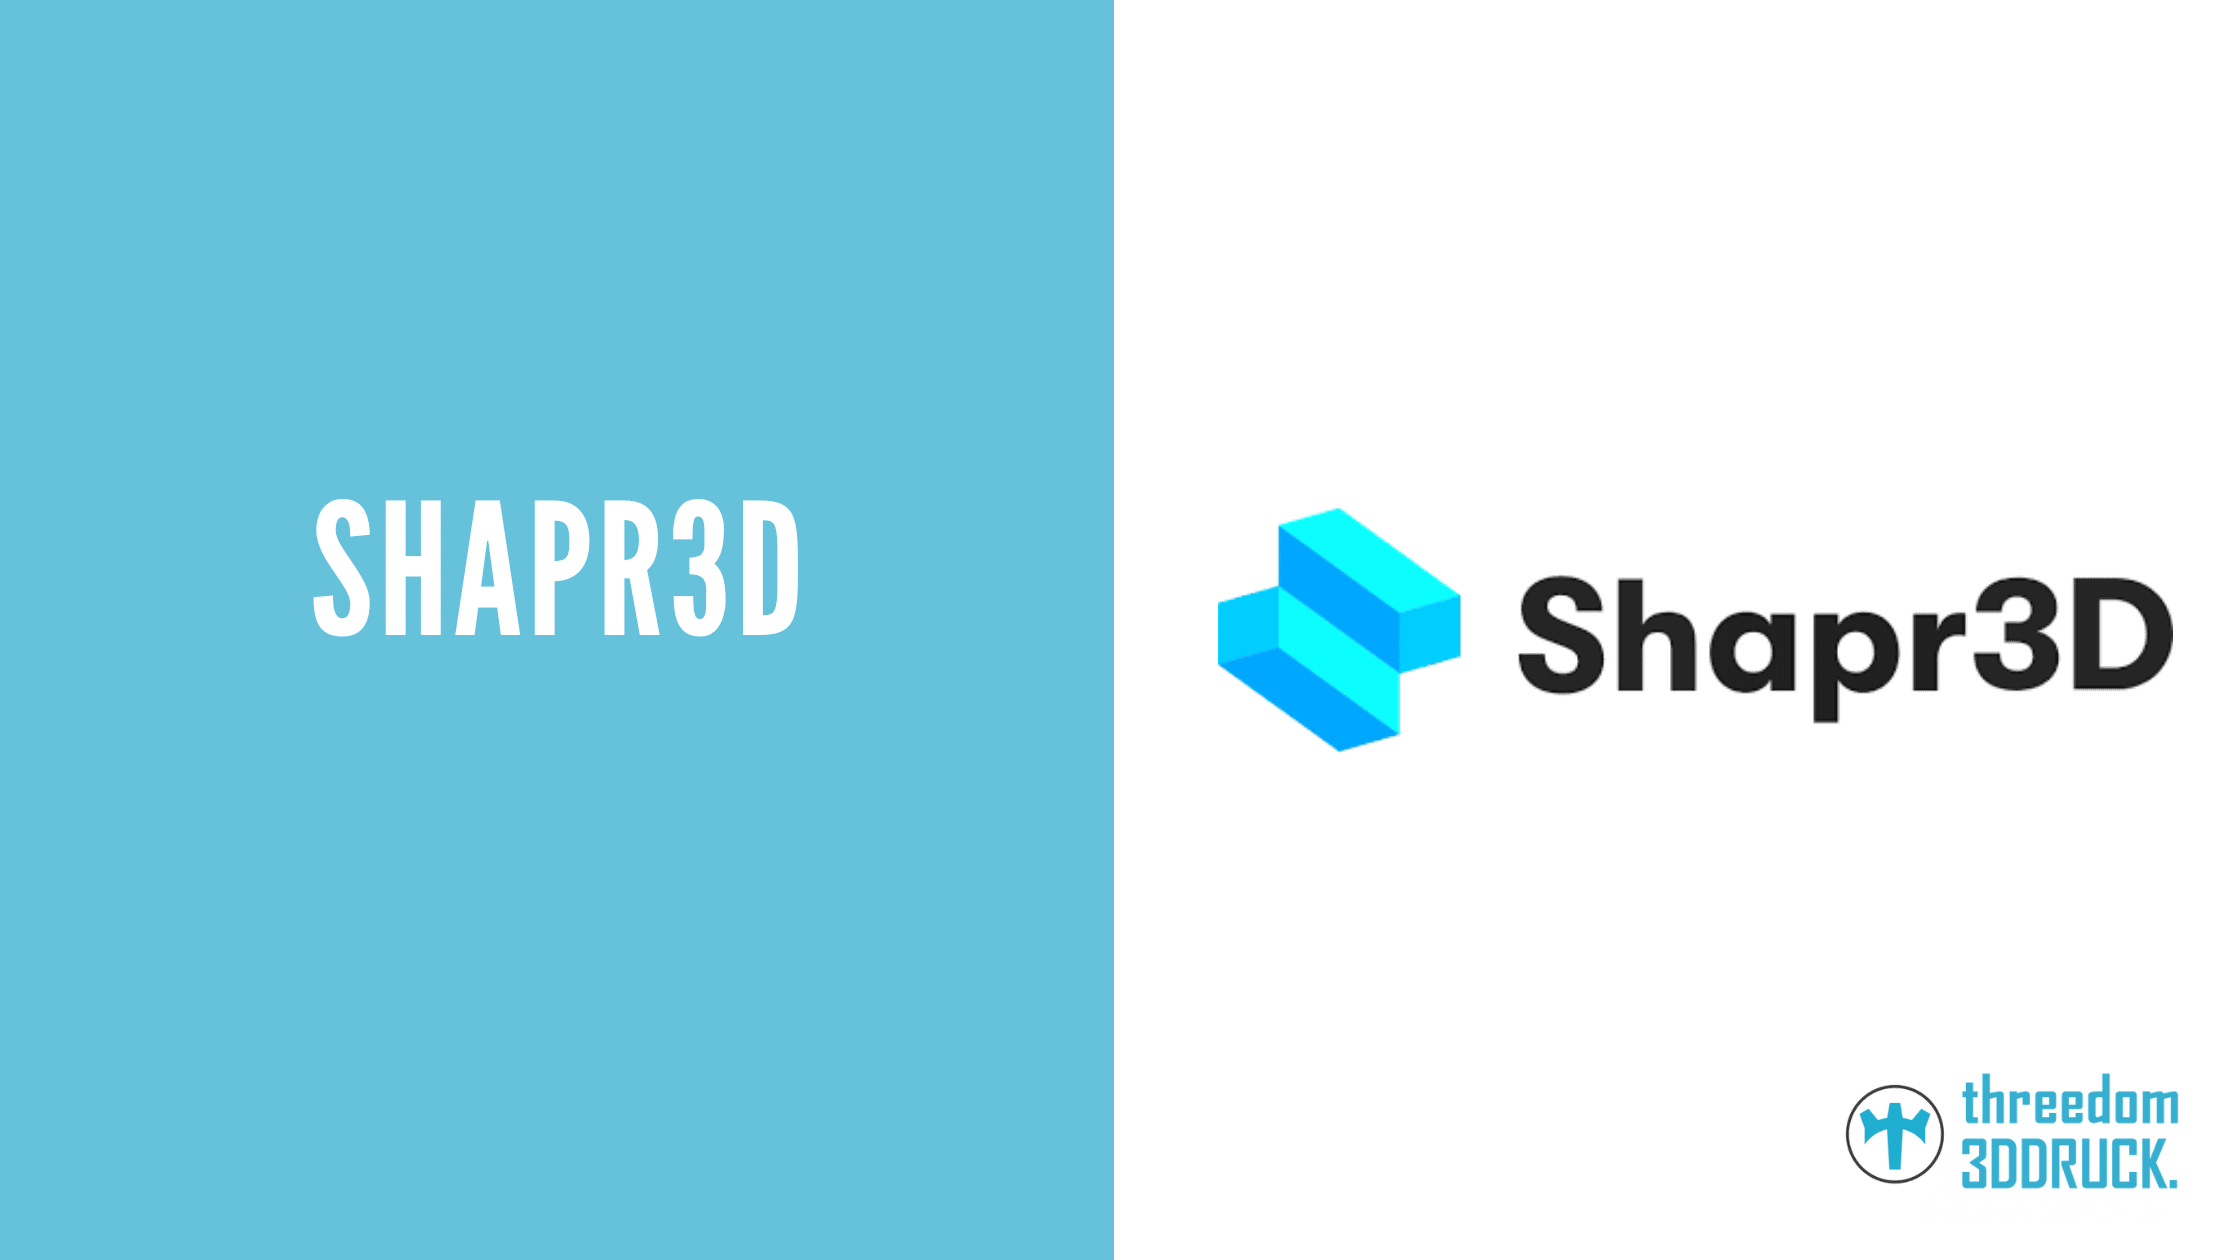 Shapr3D: definition, functionality and scope